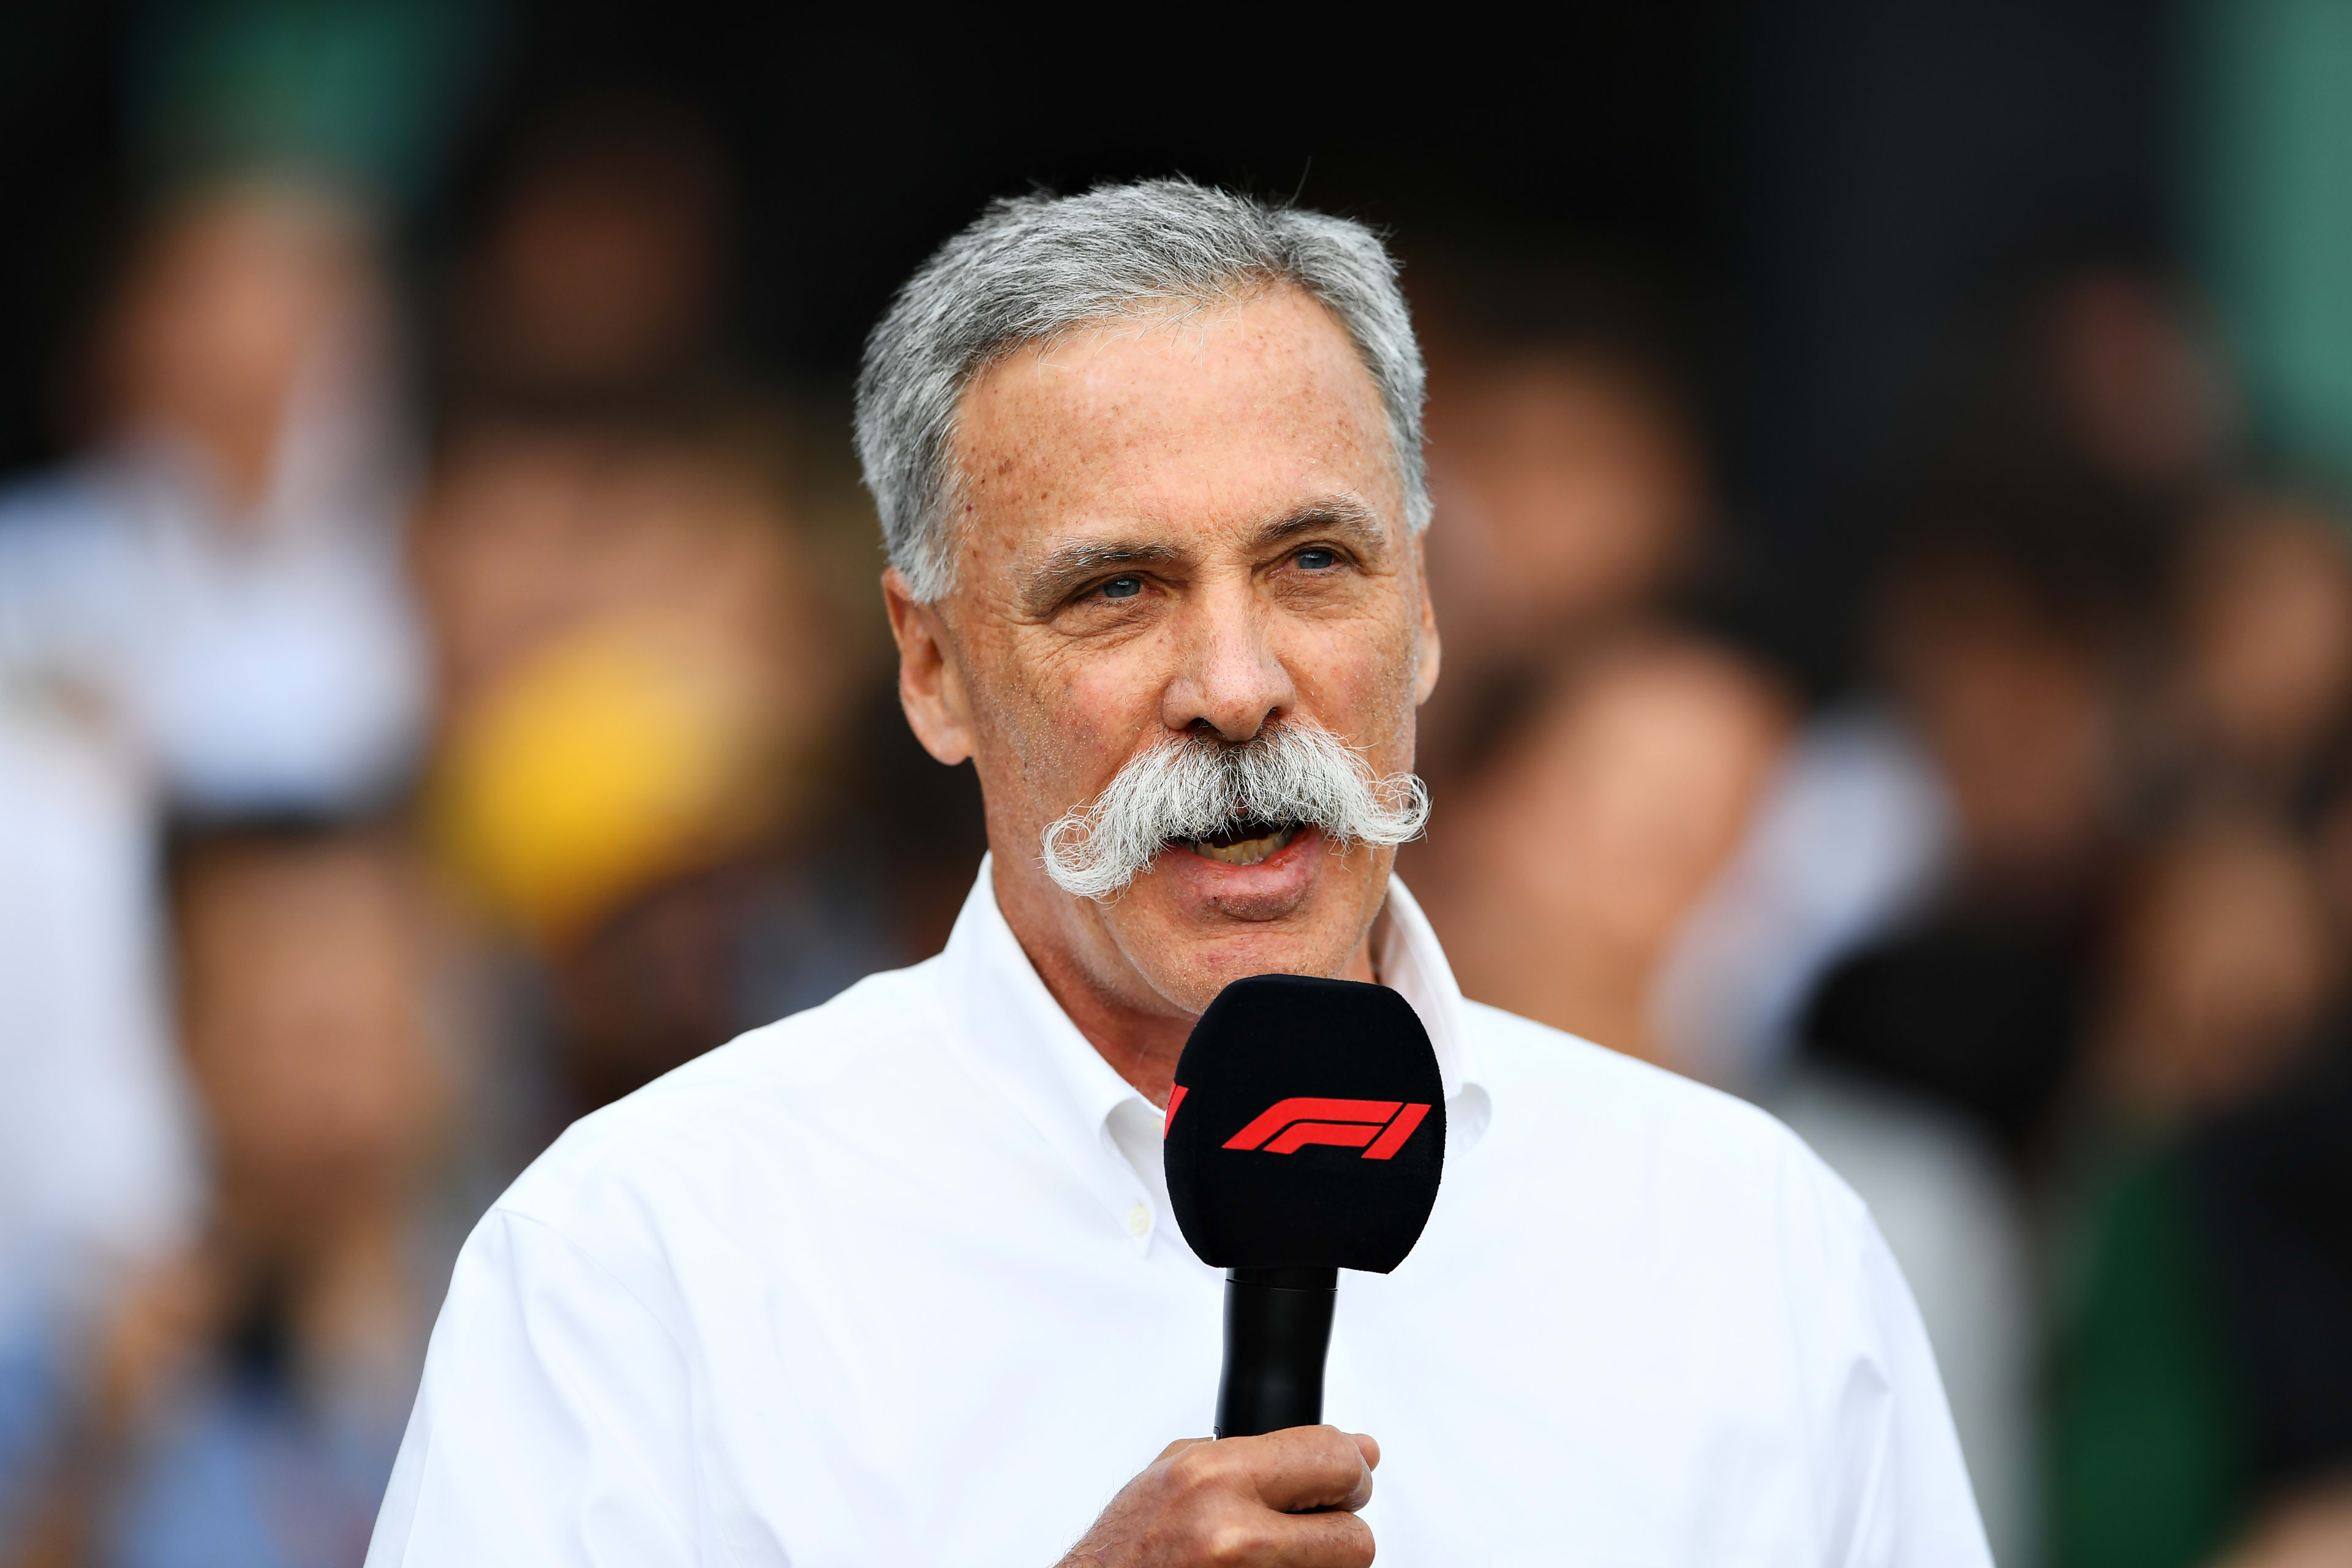 F1 boss says that no race will be cancelled even if a player tests positive for Covid-19  